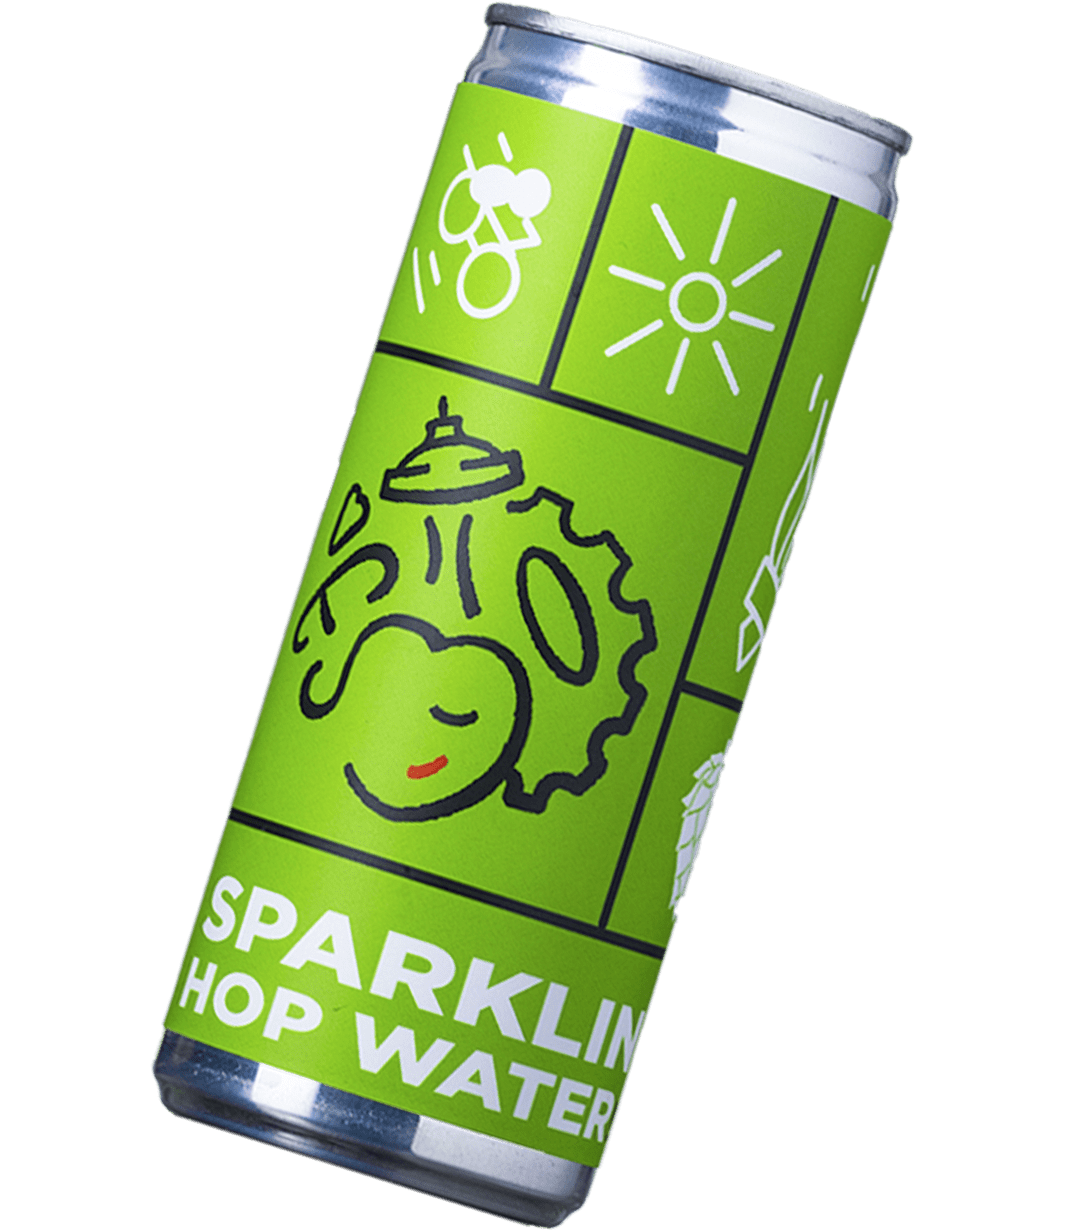 The green Metier 'Sparkling Hop Water' can with the Metier logo.